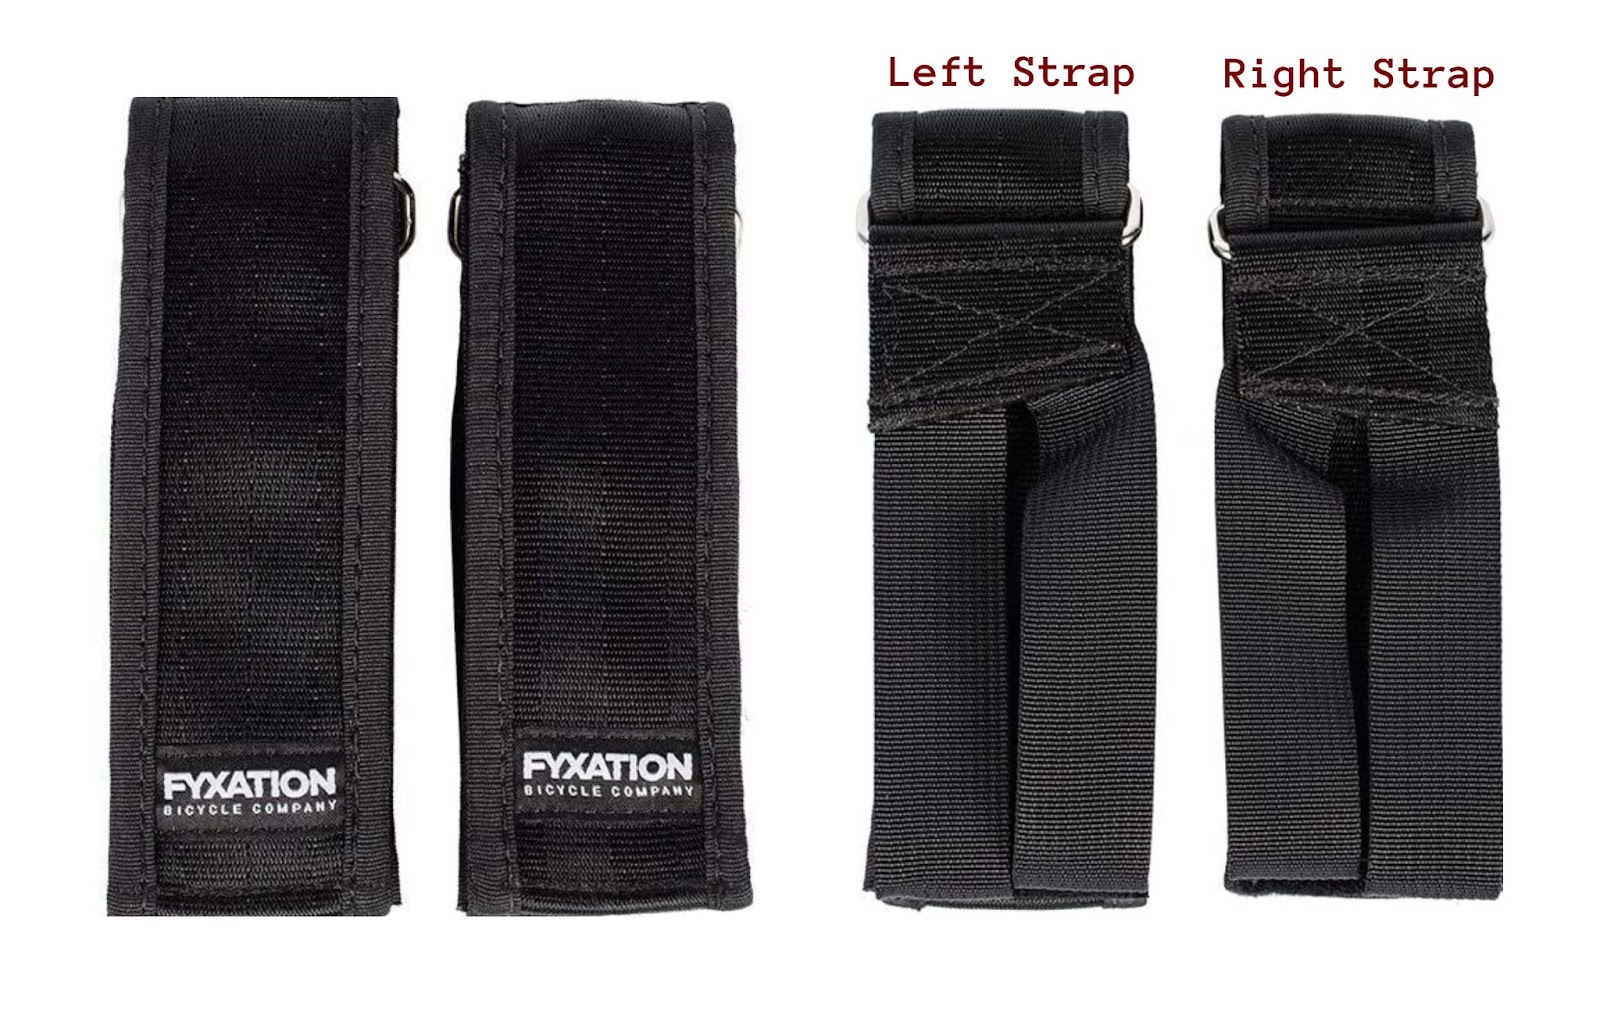 Before threading your mountain bike pedal straps be sure to check which one should be attached to the left-hand pedal and the right-hand pedal respectively. 